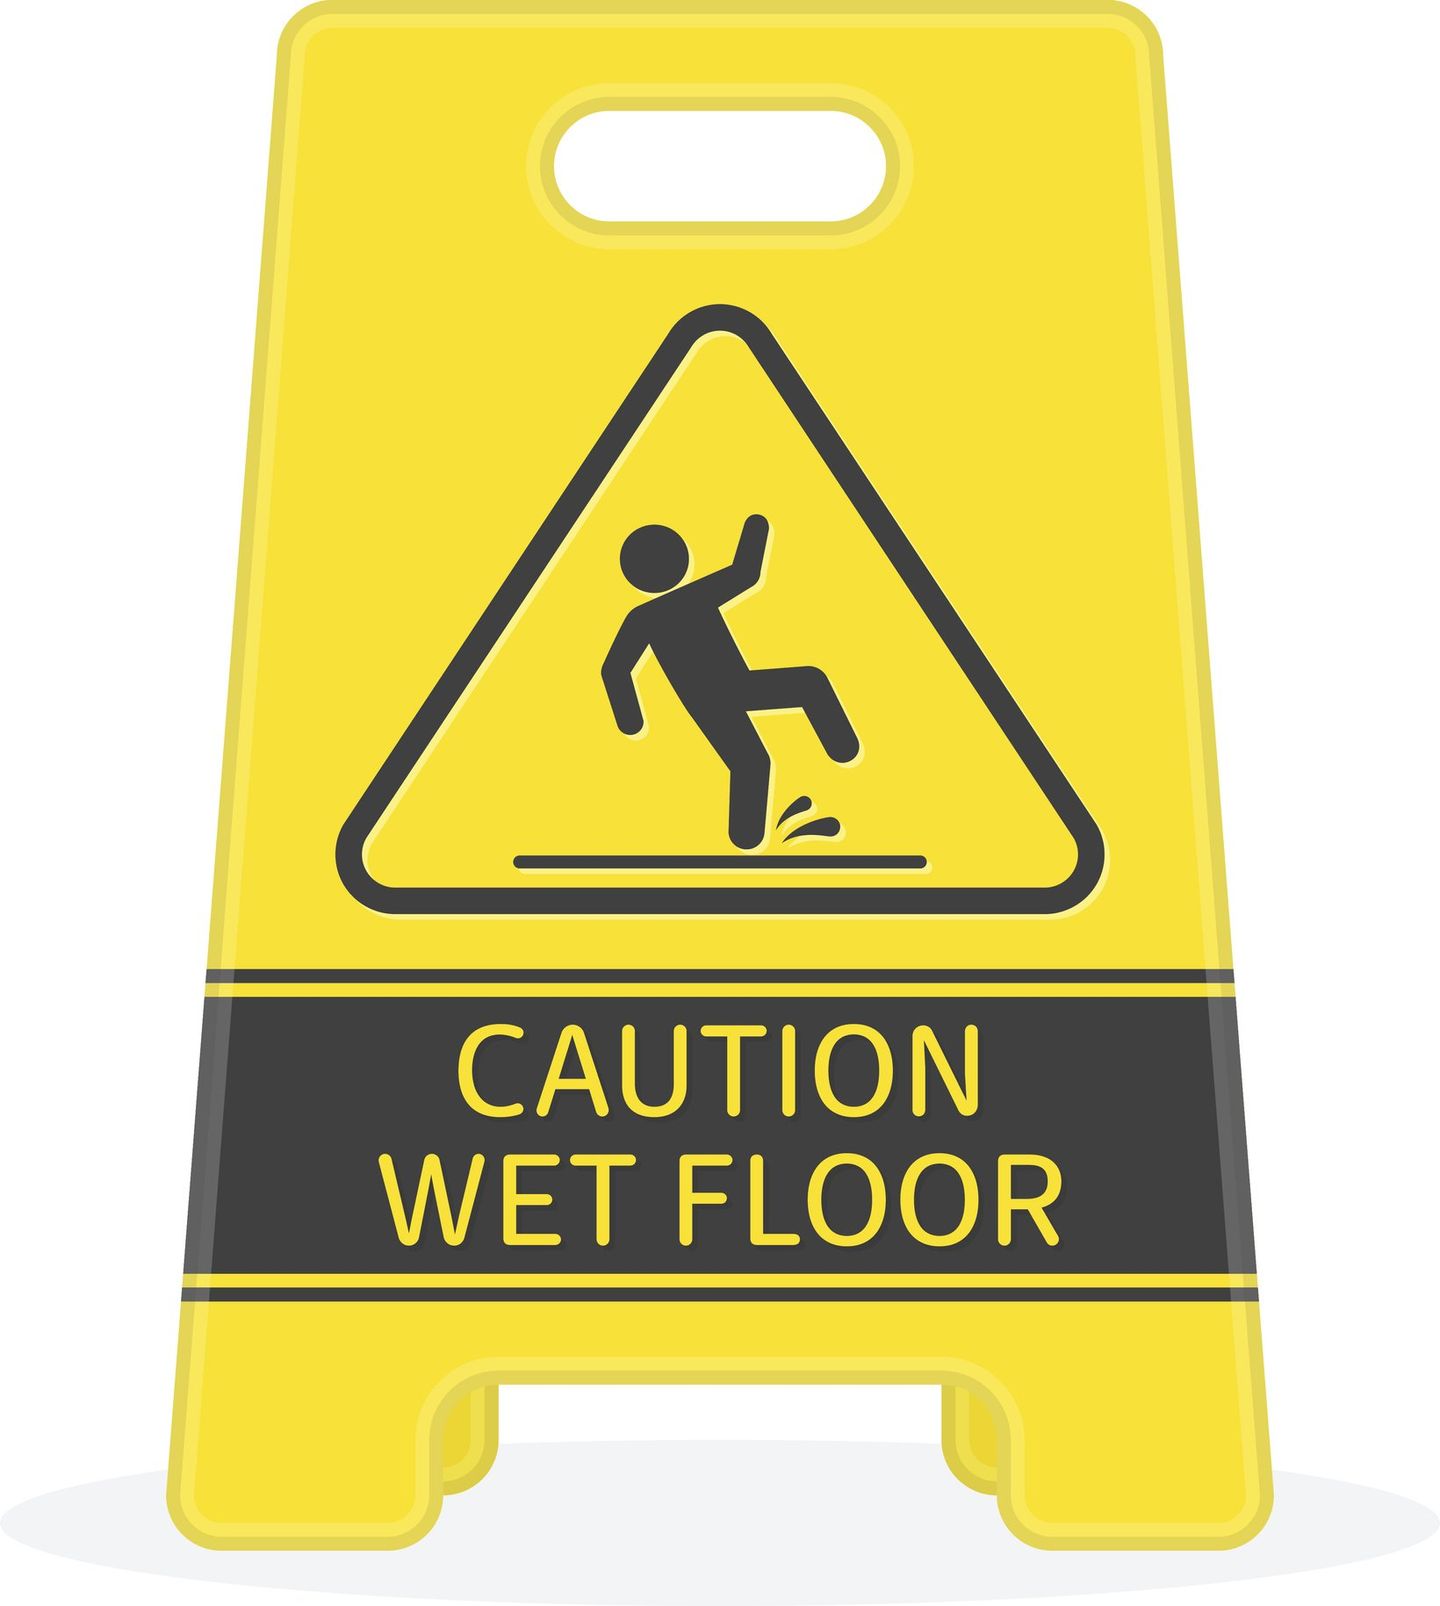 Picture of a Caution Wet Floor sign provided by Texas Road & Sign Supply